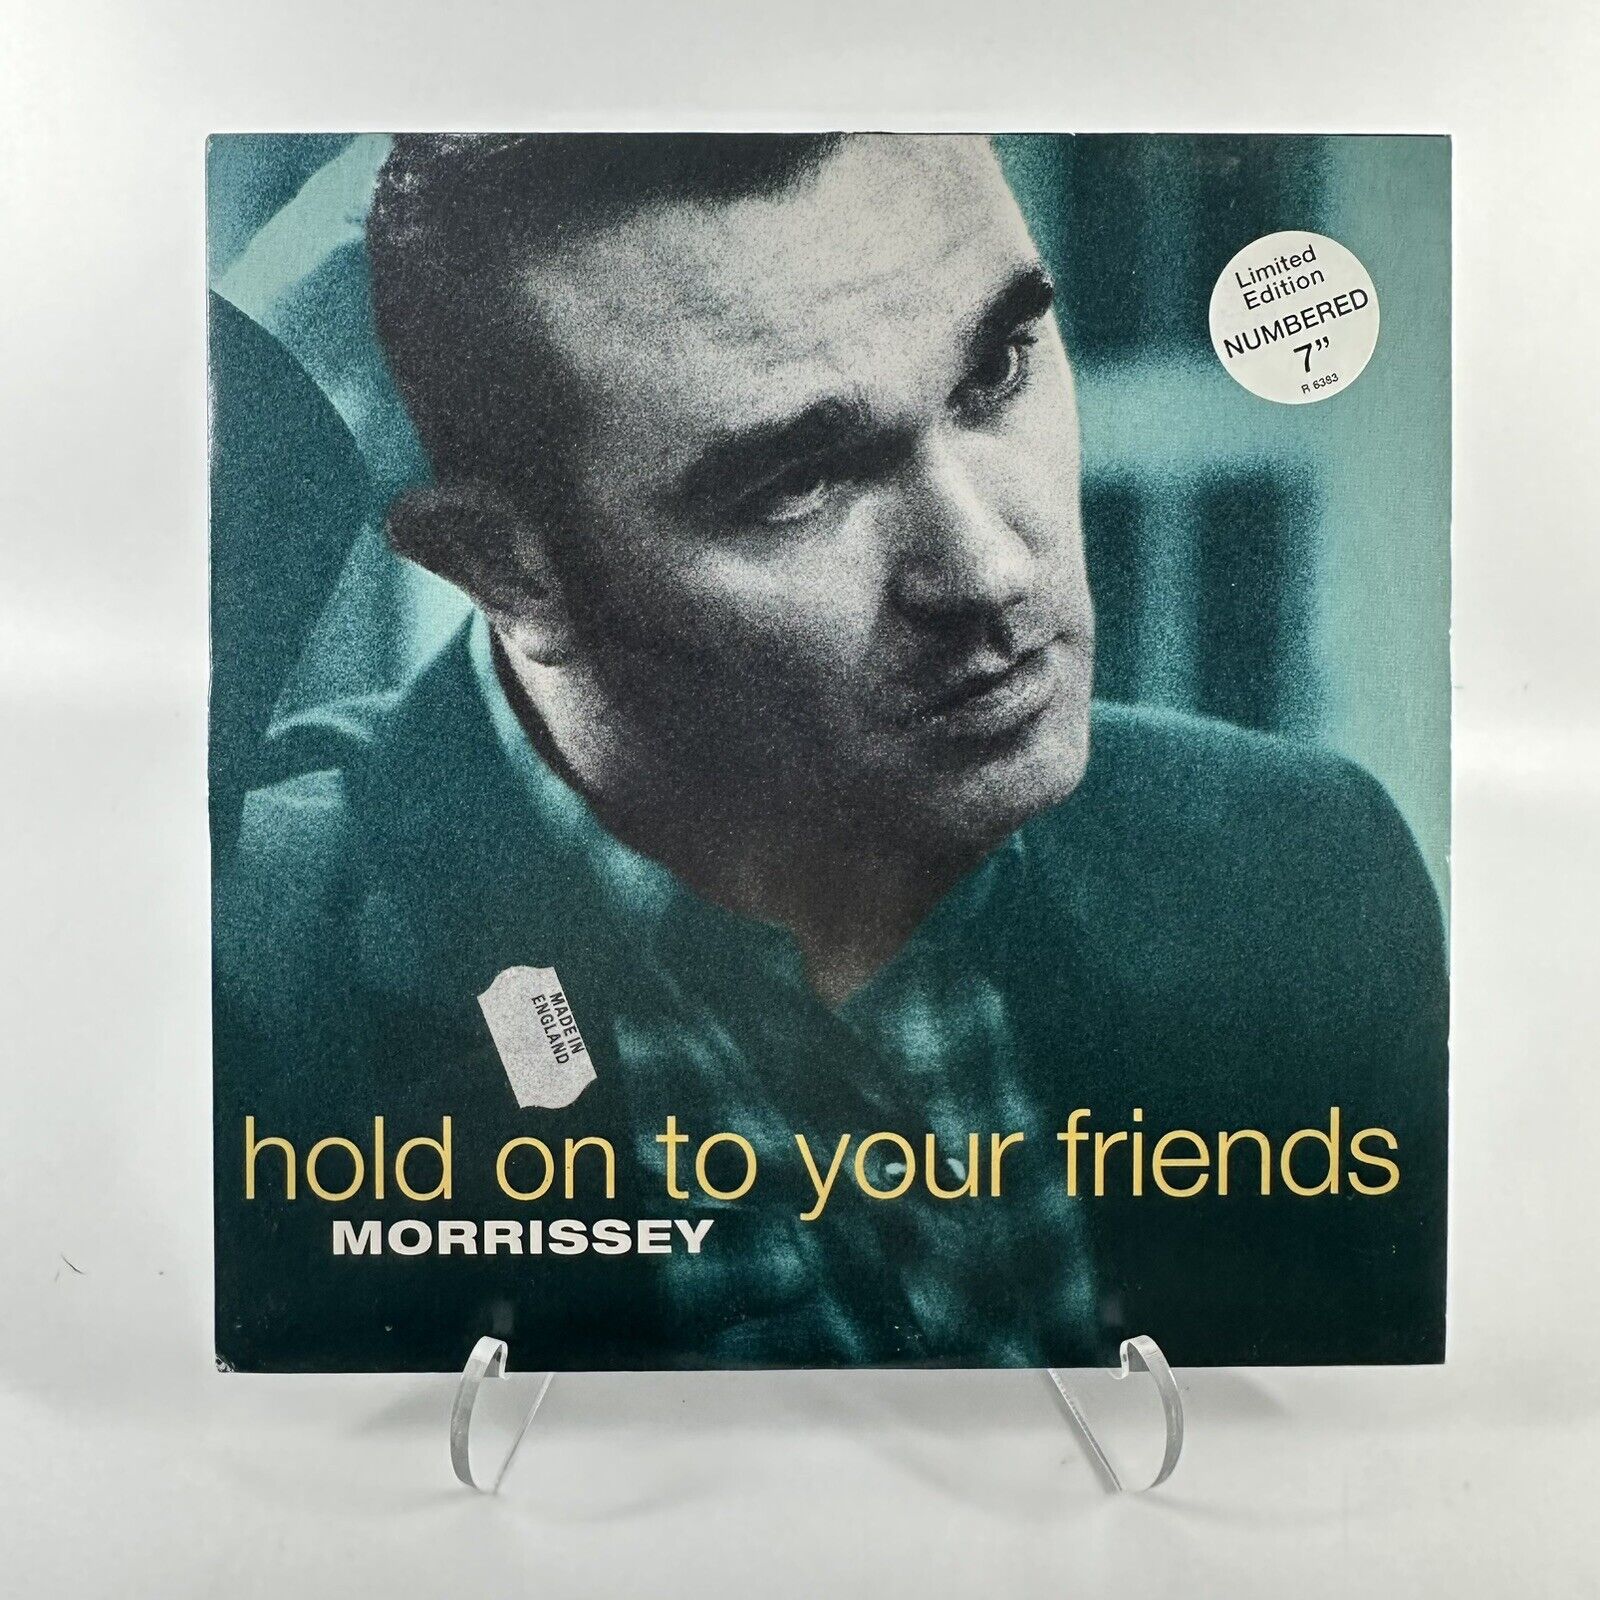 Morrissey - Hold On To Your Friends 7” Vinyl